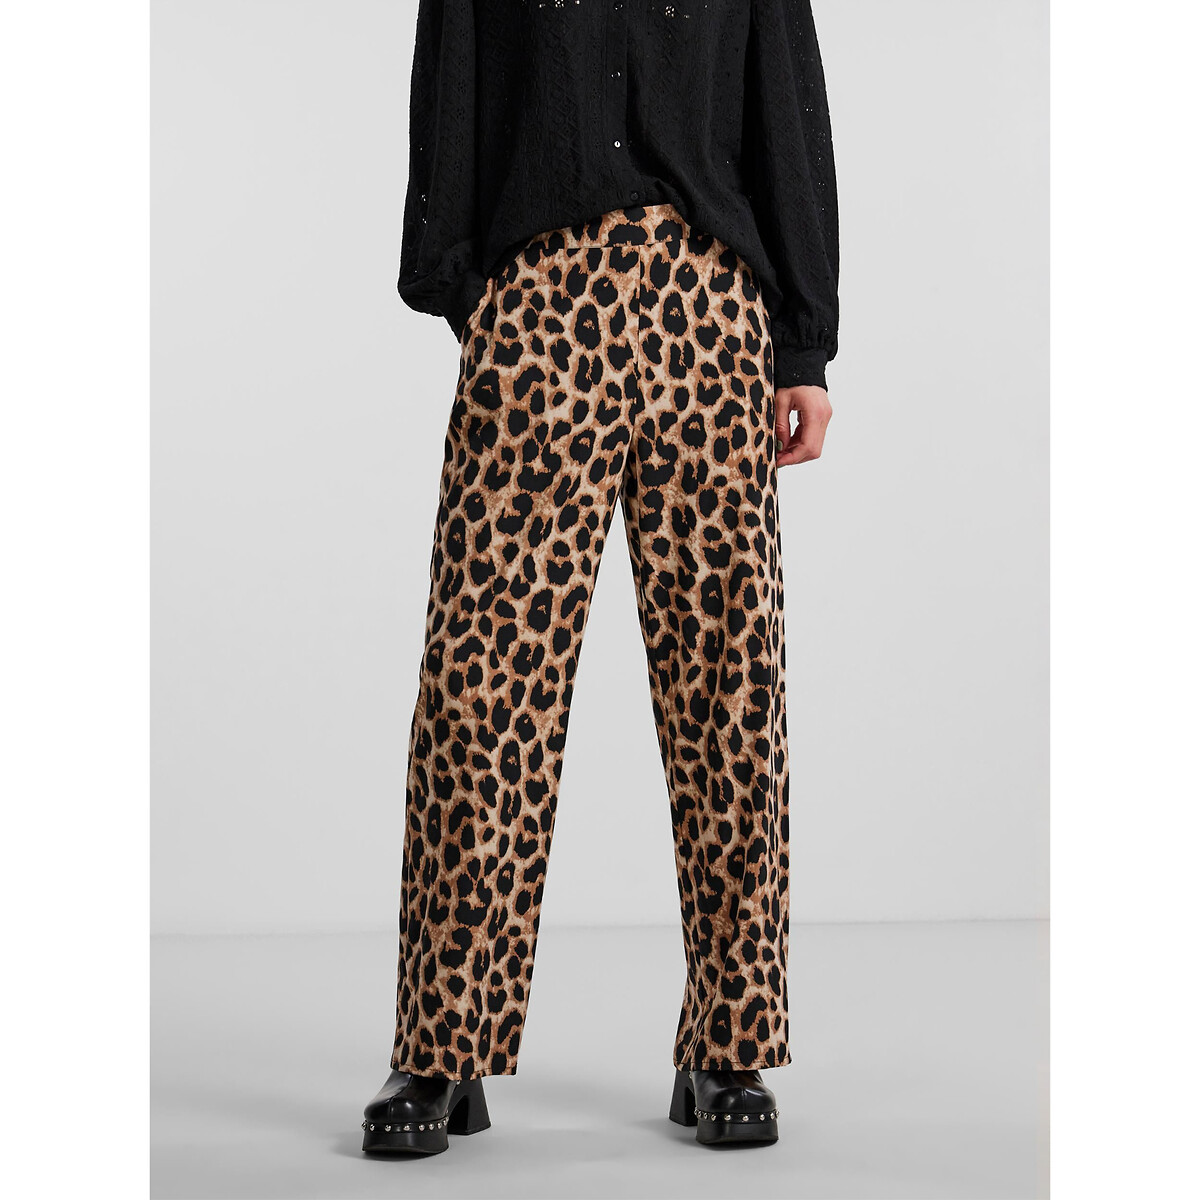 Leopard Print Trousers with High Waist